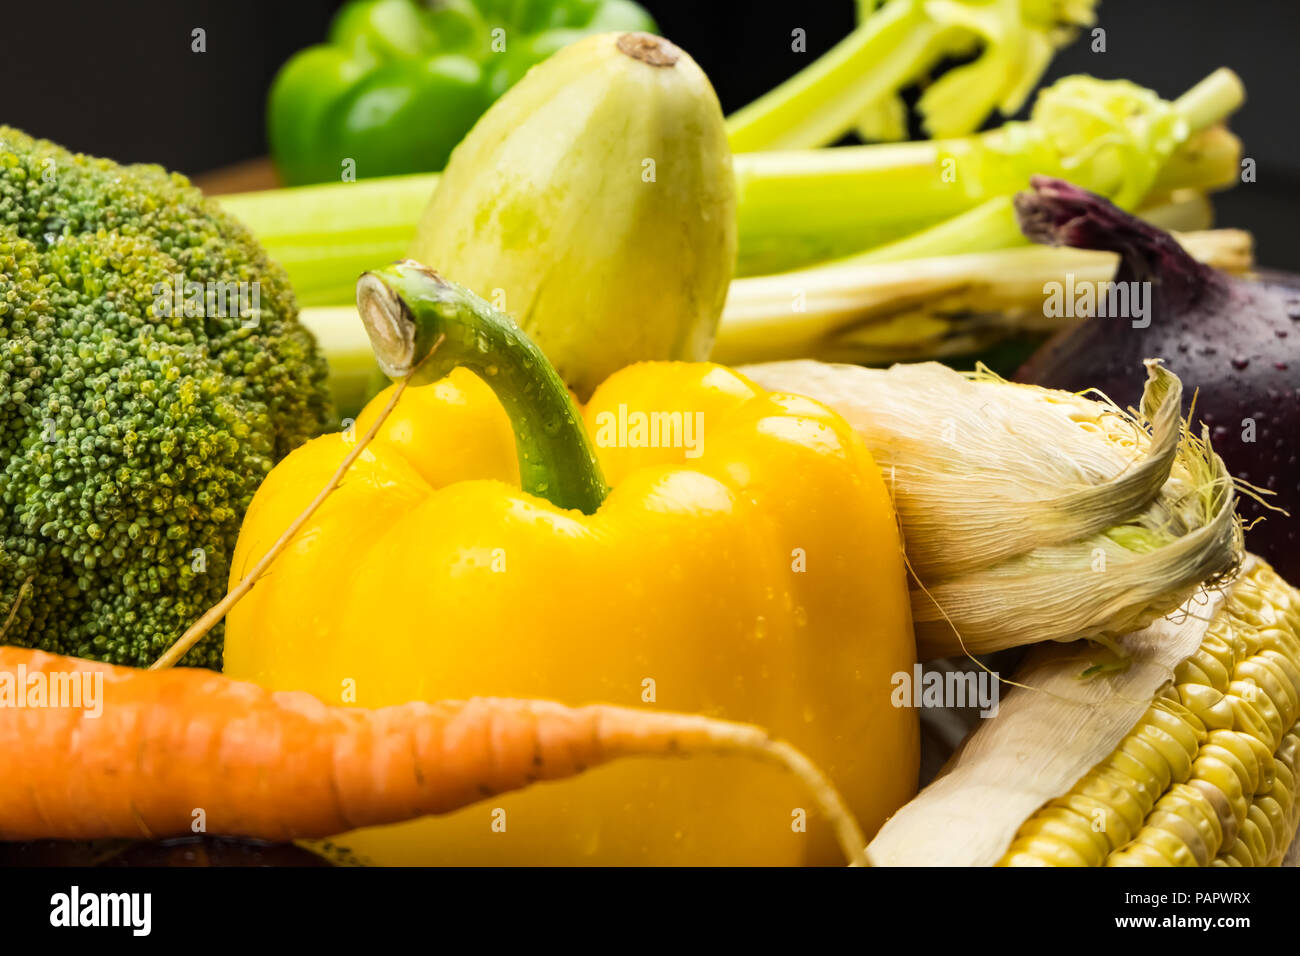 Fresh organic vegetables on rustic wood table, close-up. Locally grown bell pepper, corn and other natural vegan food laying on table Stock Photo